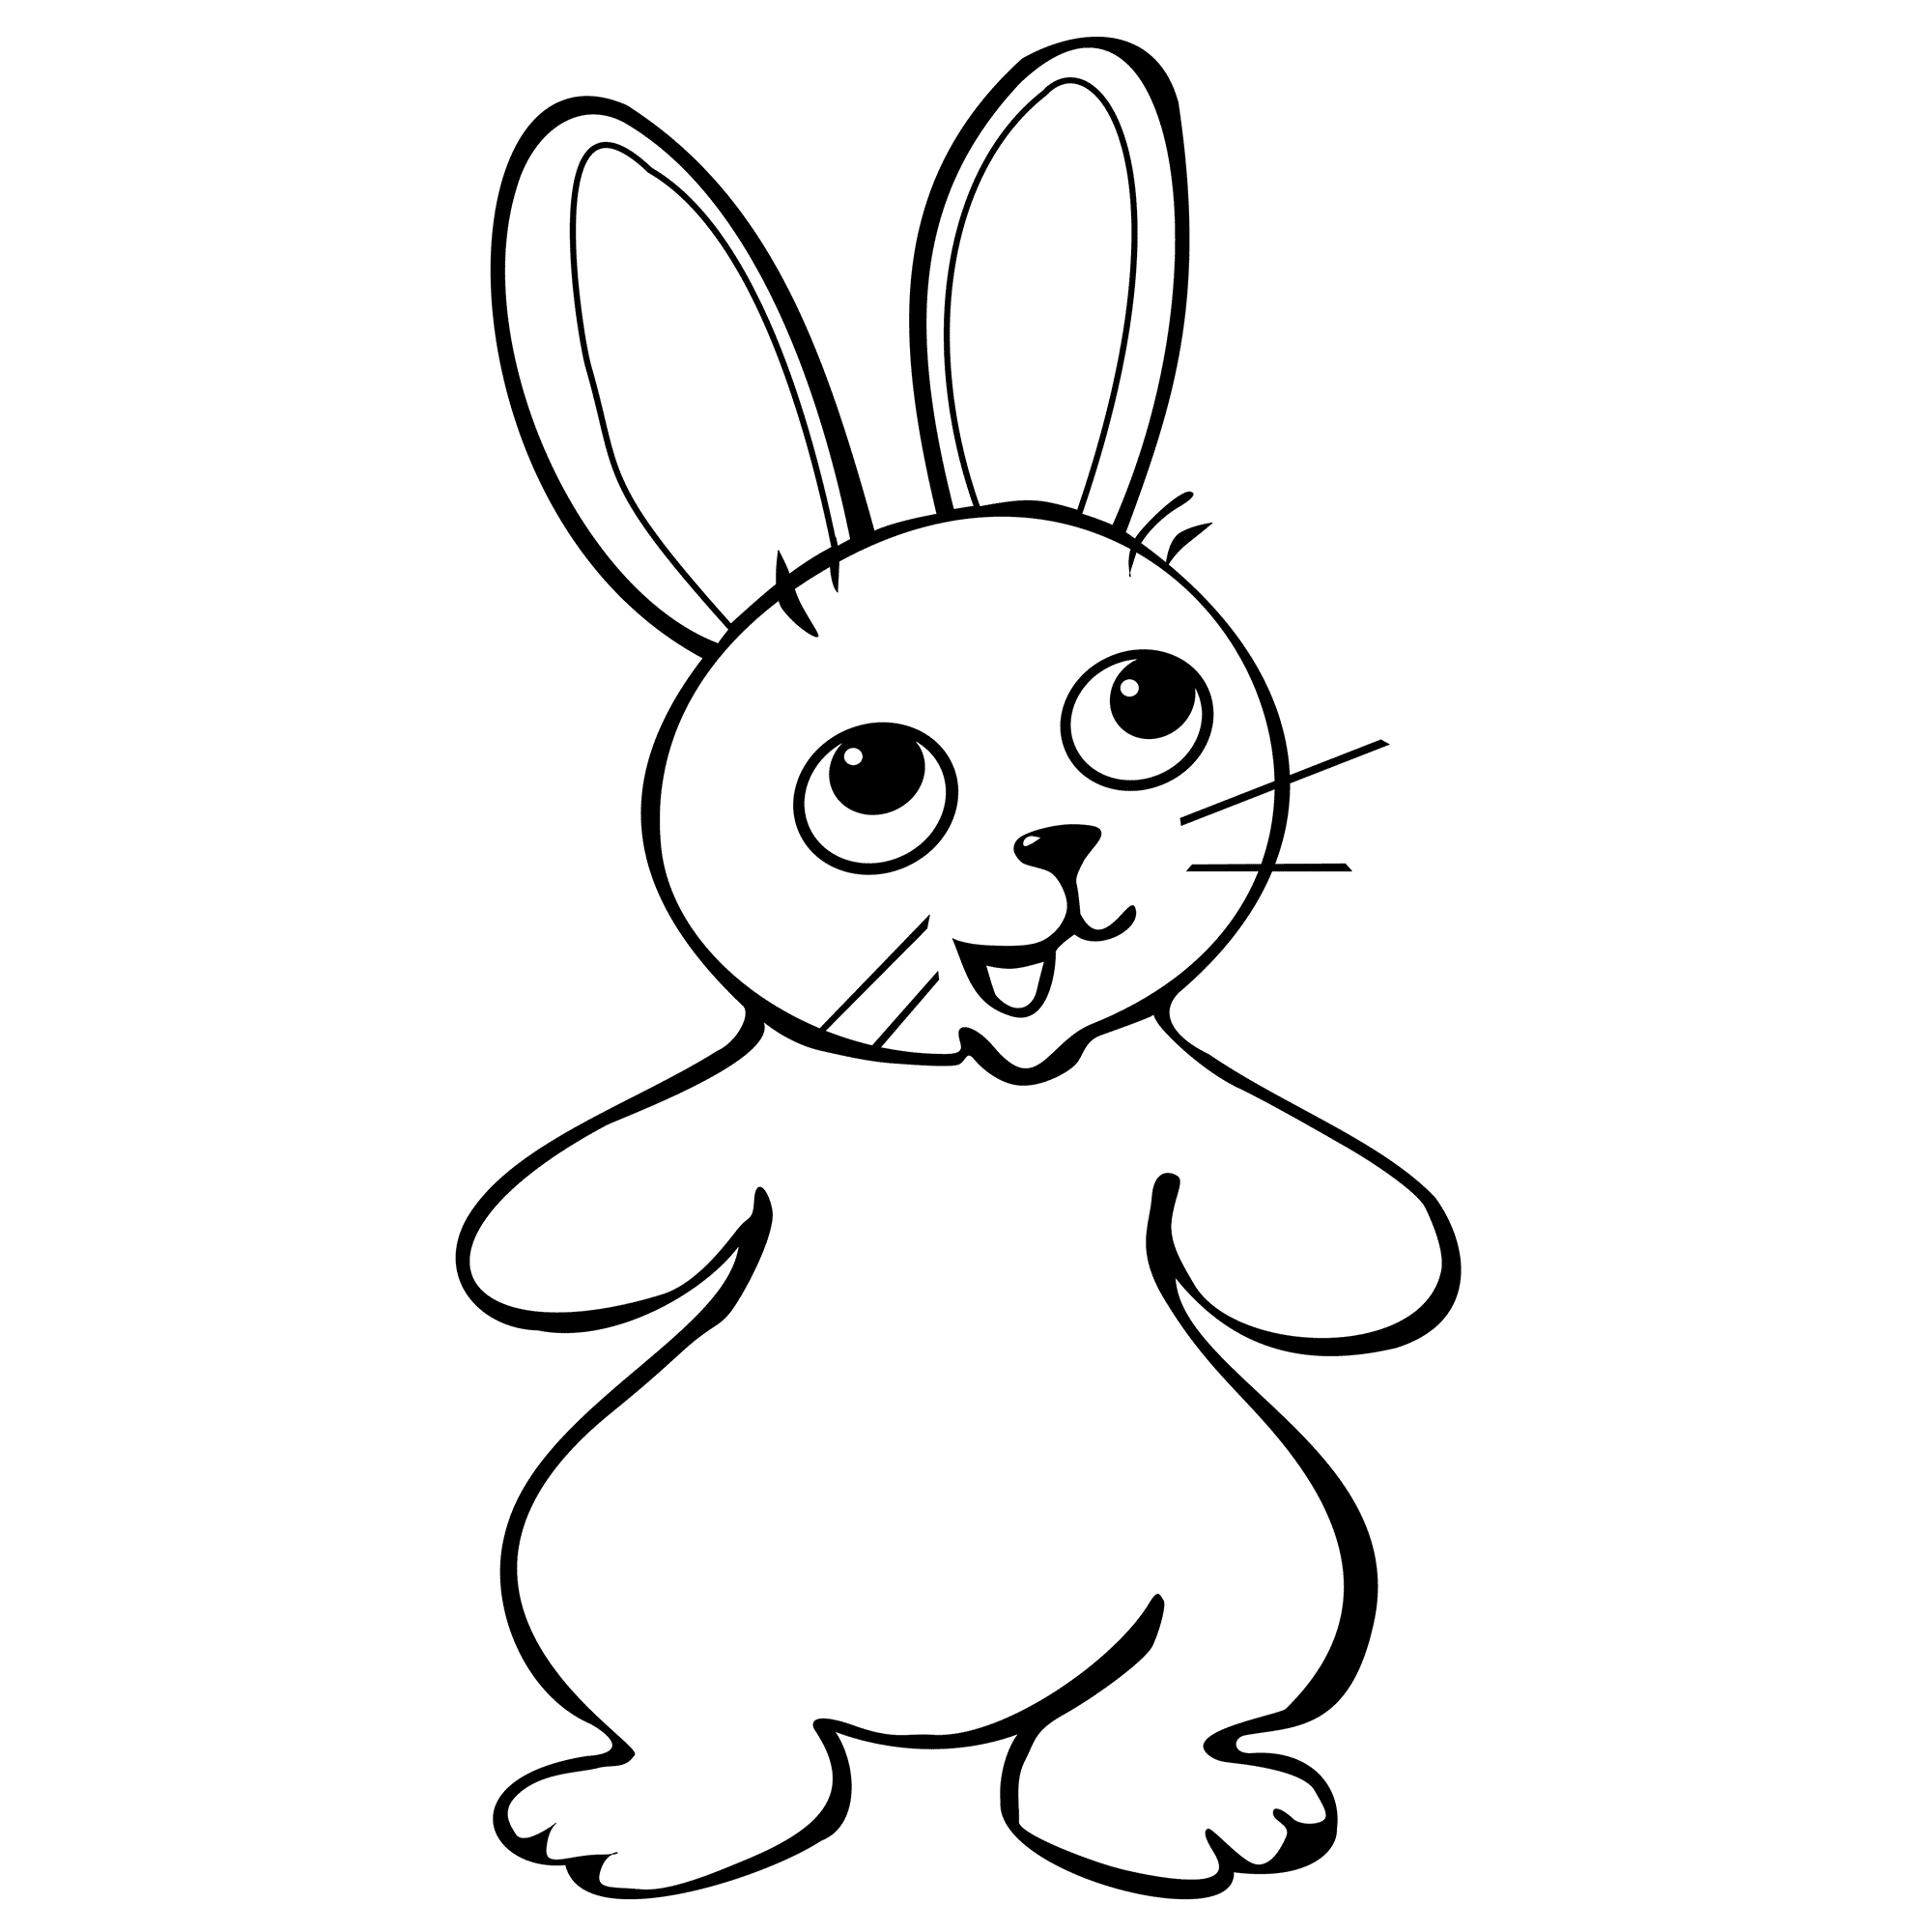 rabbit pictures to colour rabbit to color for kids rabbit kids coloring pages pictures to colour rabbit 